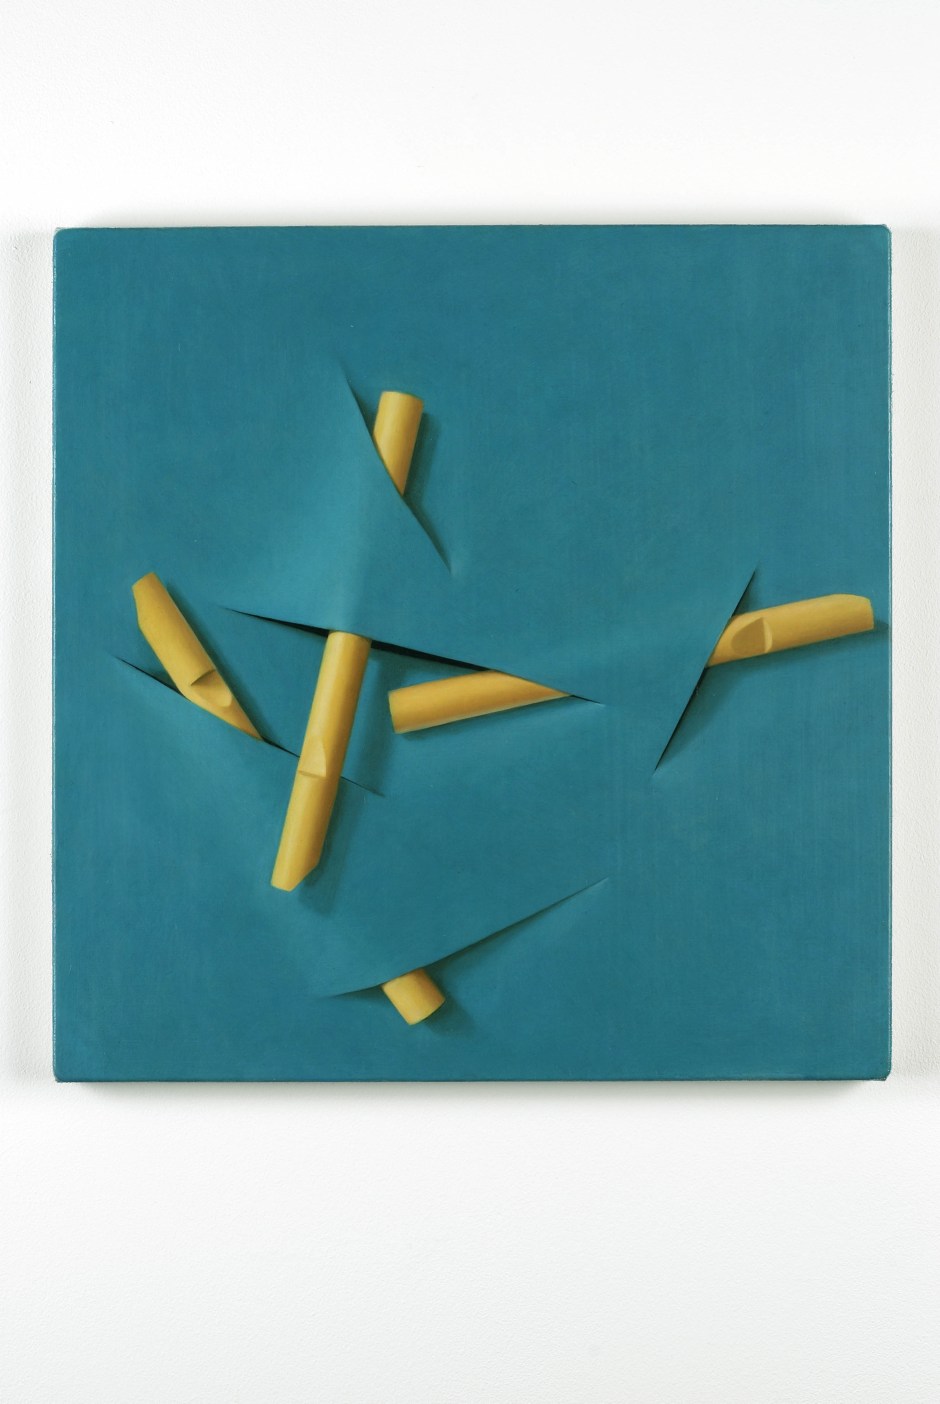 Untitled, 2009  oil on linen  44.5 x 44.0 x 2.5 cm 17 1/2 x 17 3/8 x 1 in.